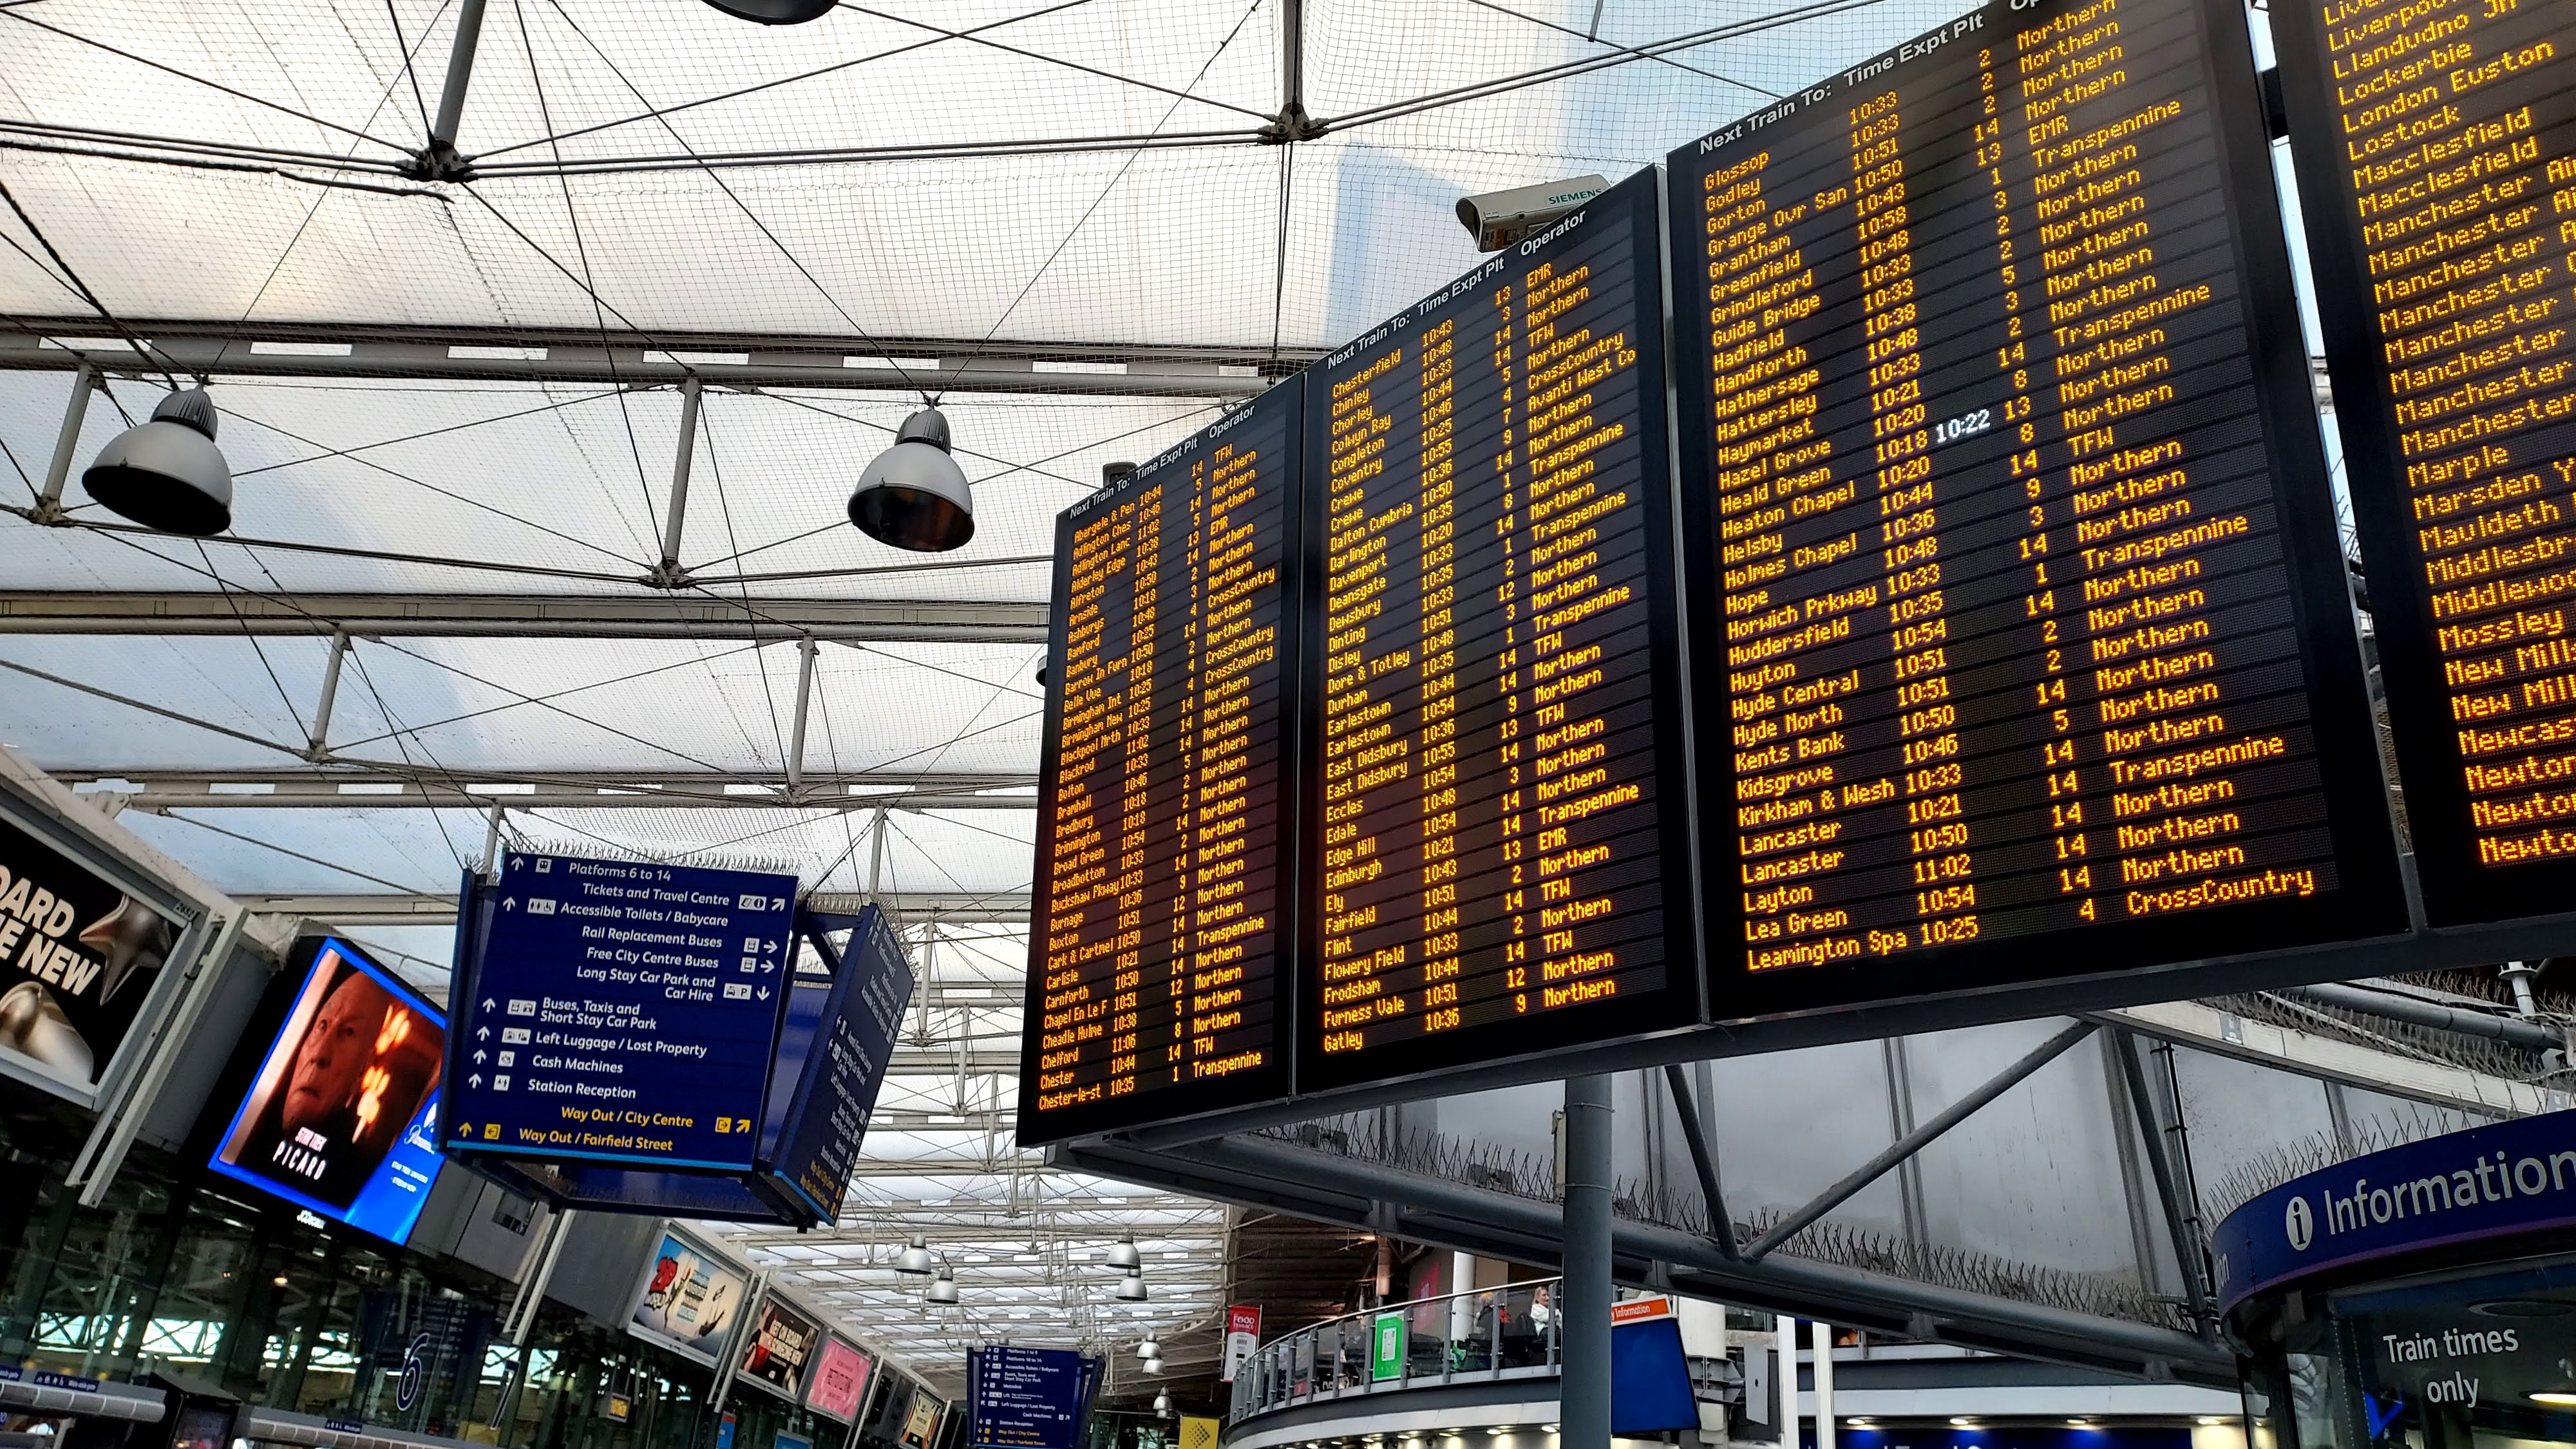 Manchester_Piccadilly_staion_train_departure_time_screen_2023.jpg